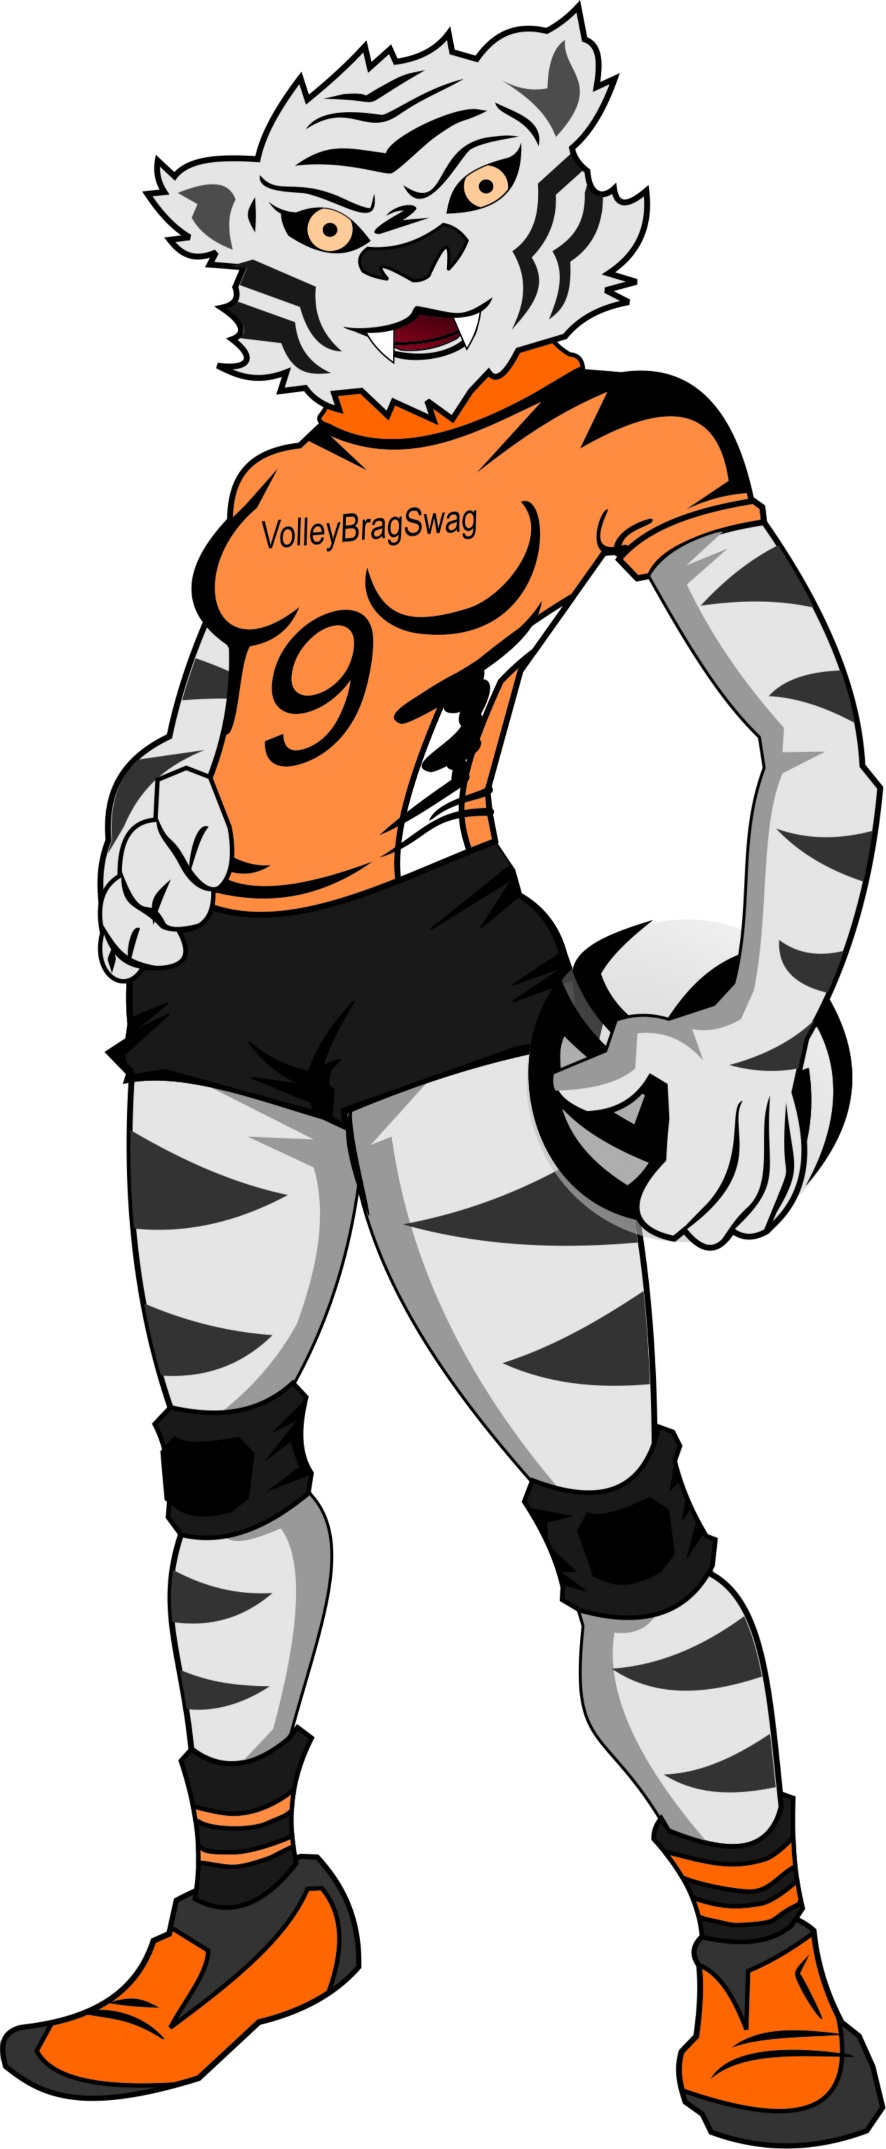 Say "Hi" to Miss Tattoo the Tiger wearing the #9 jersey below.  Miss Tattoo is the starting defensive and serving specialist for the All Beast VolleyBragSwag All Star team.